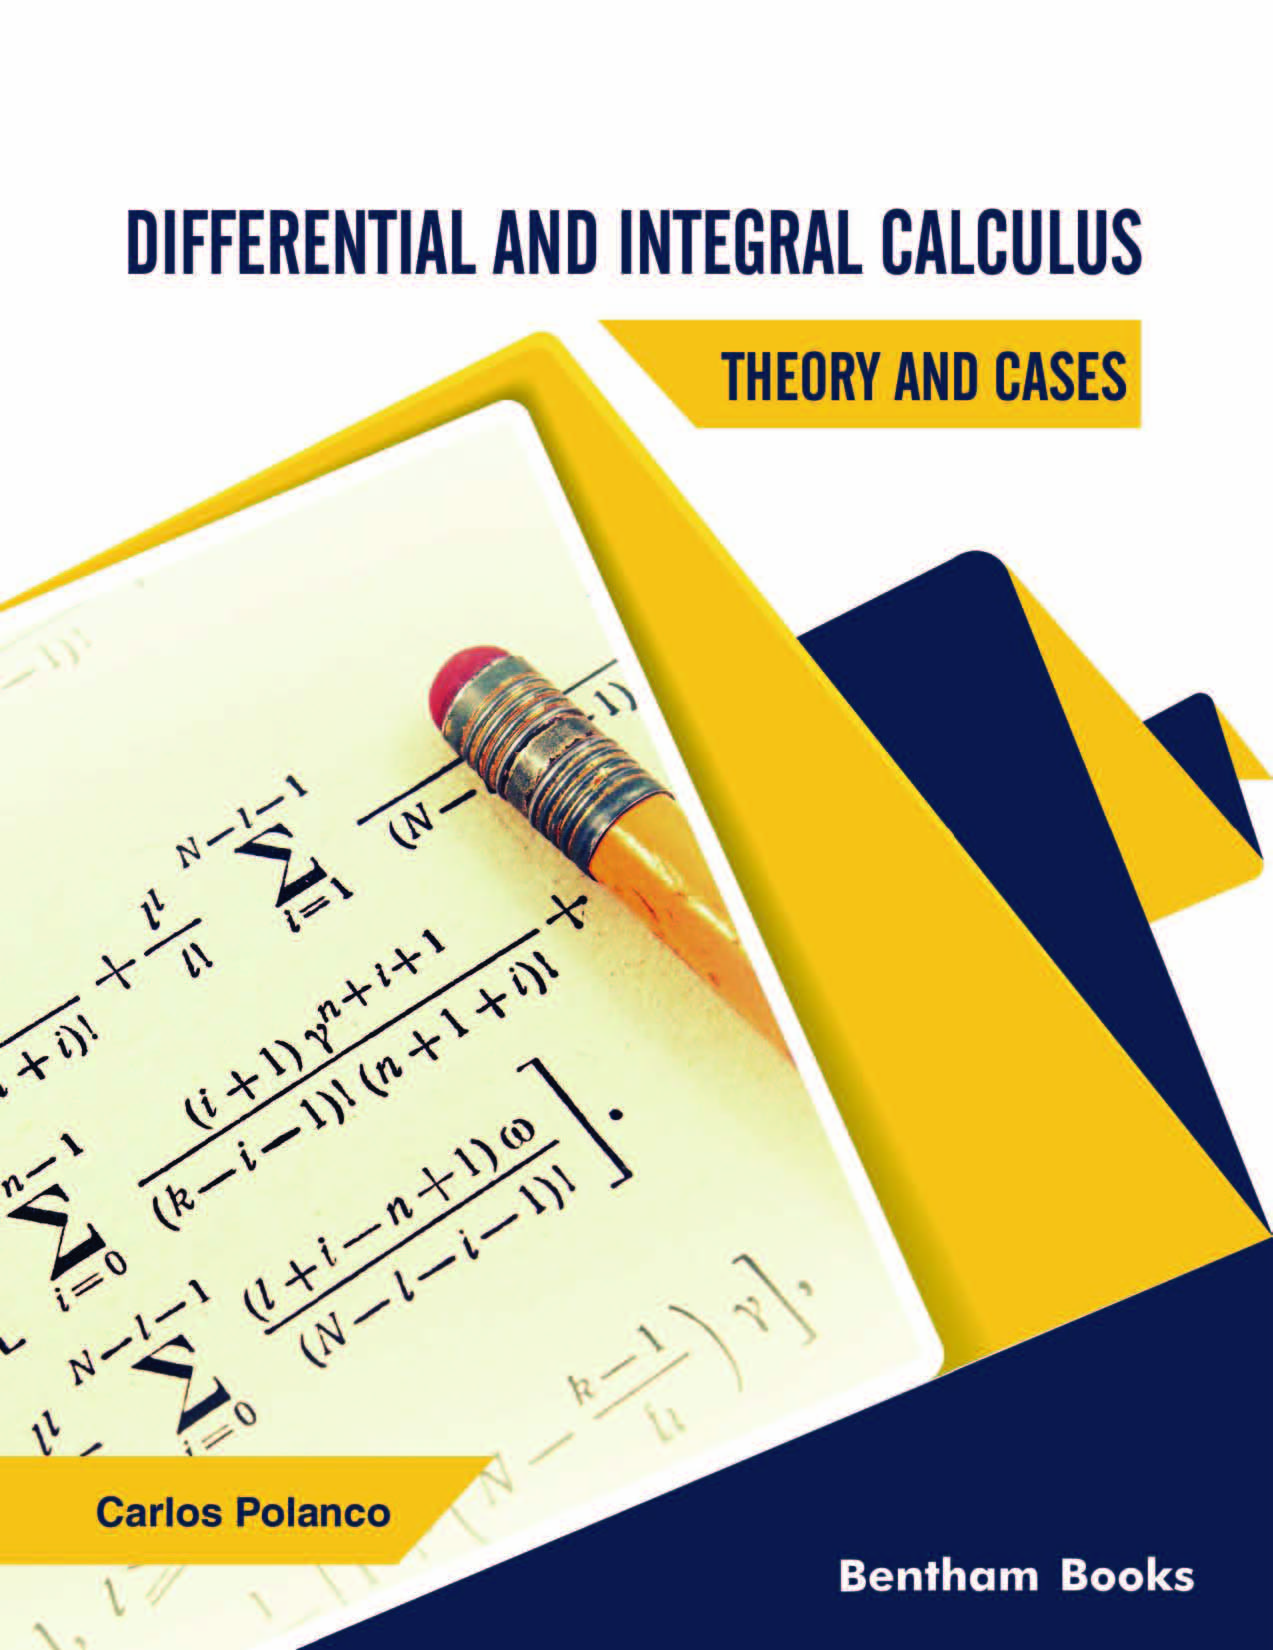 Differential and Integral Calculus - Theory and Cases